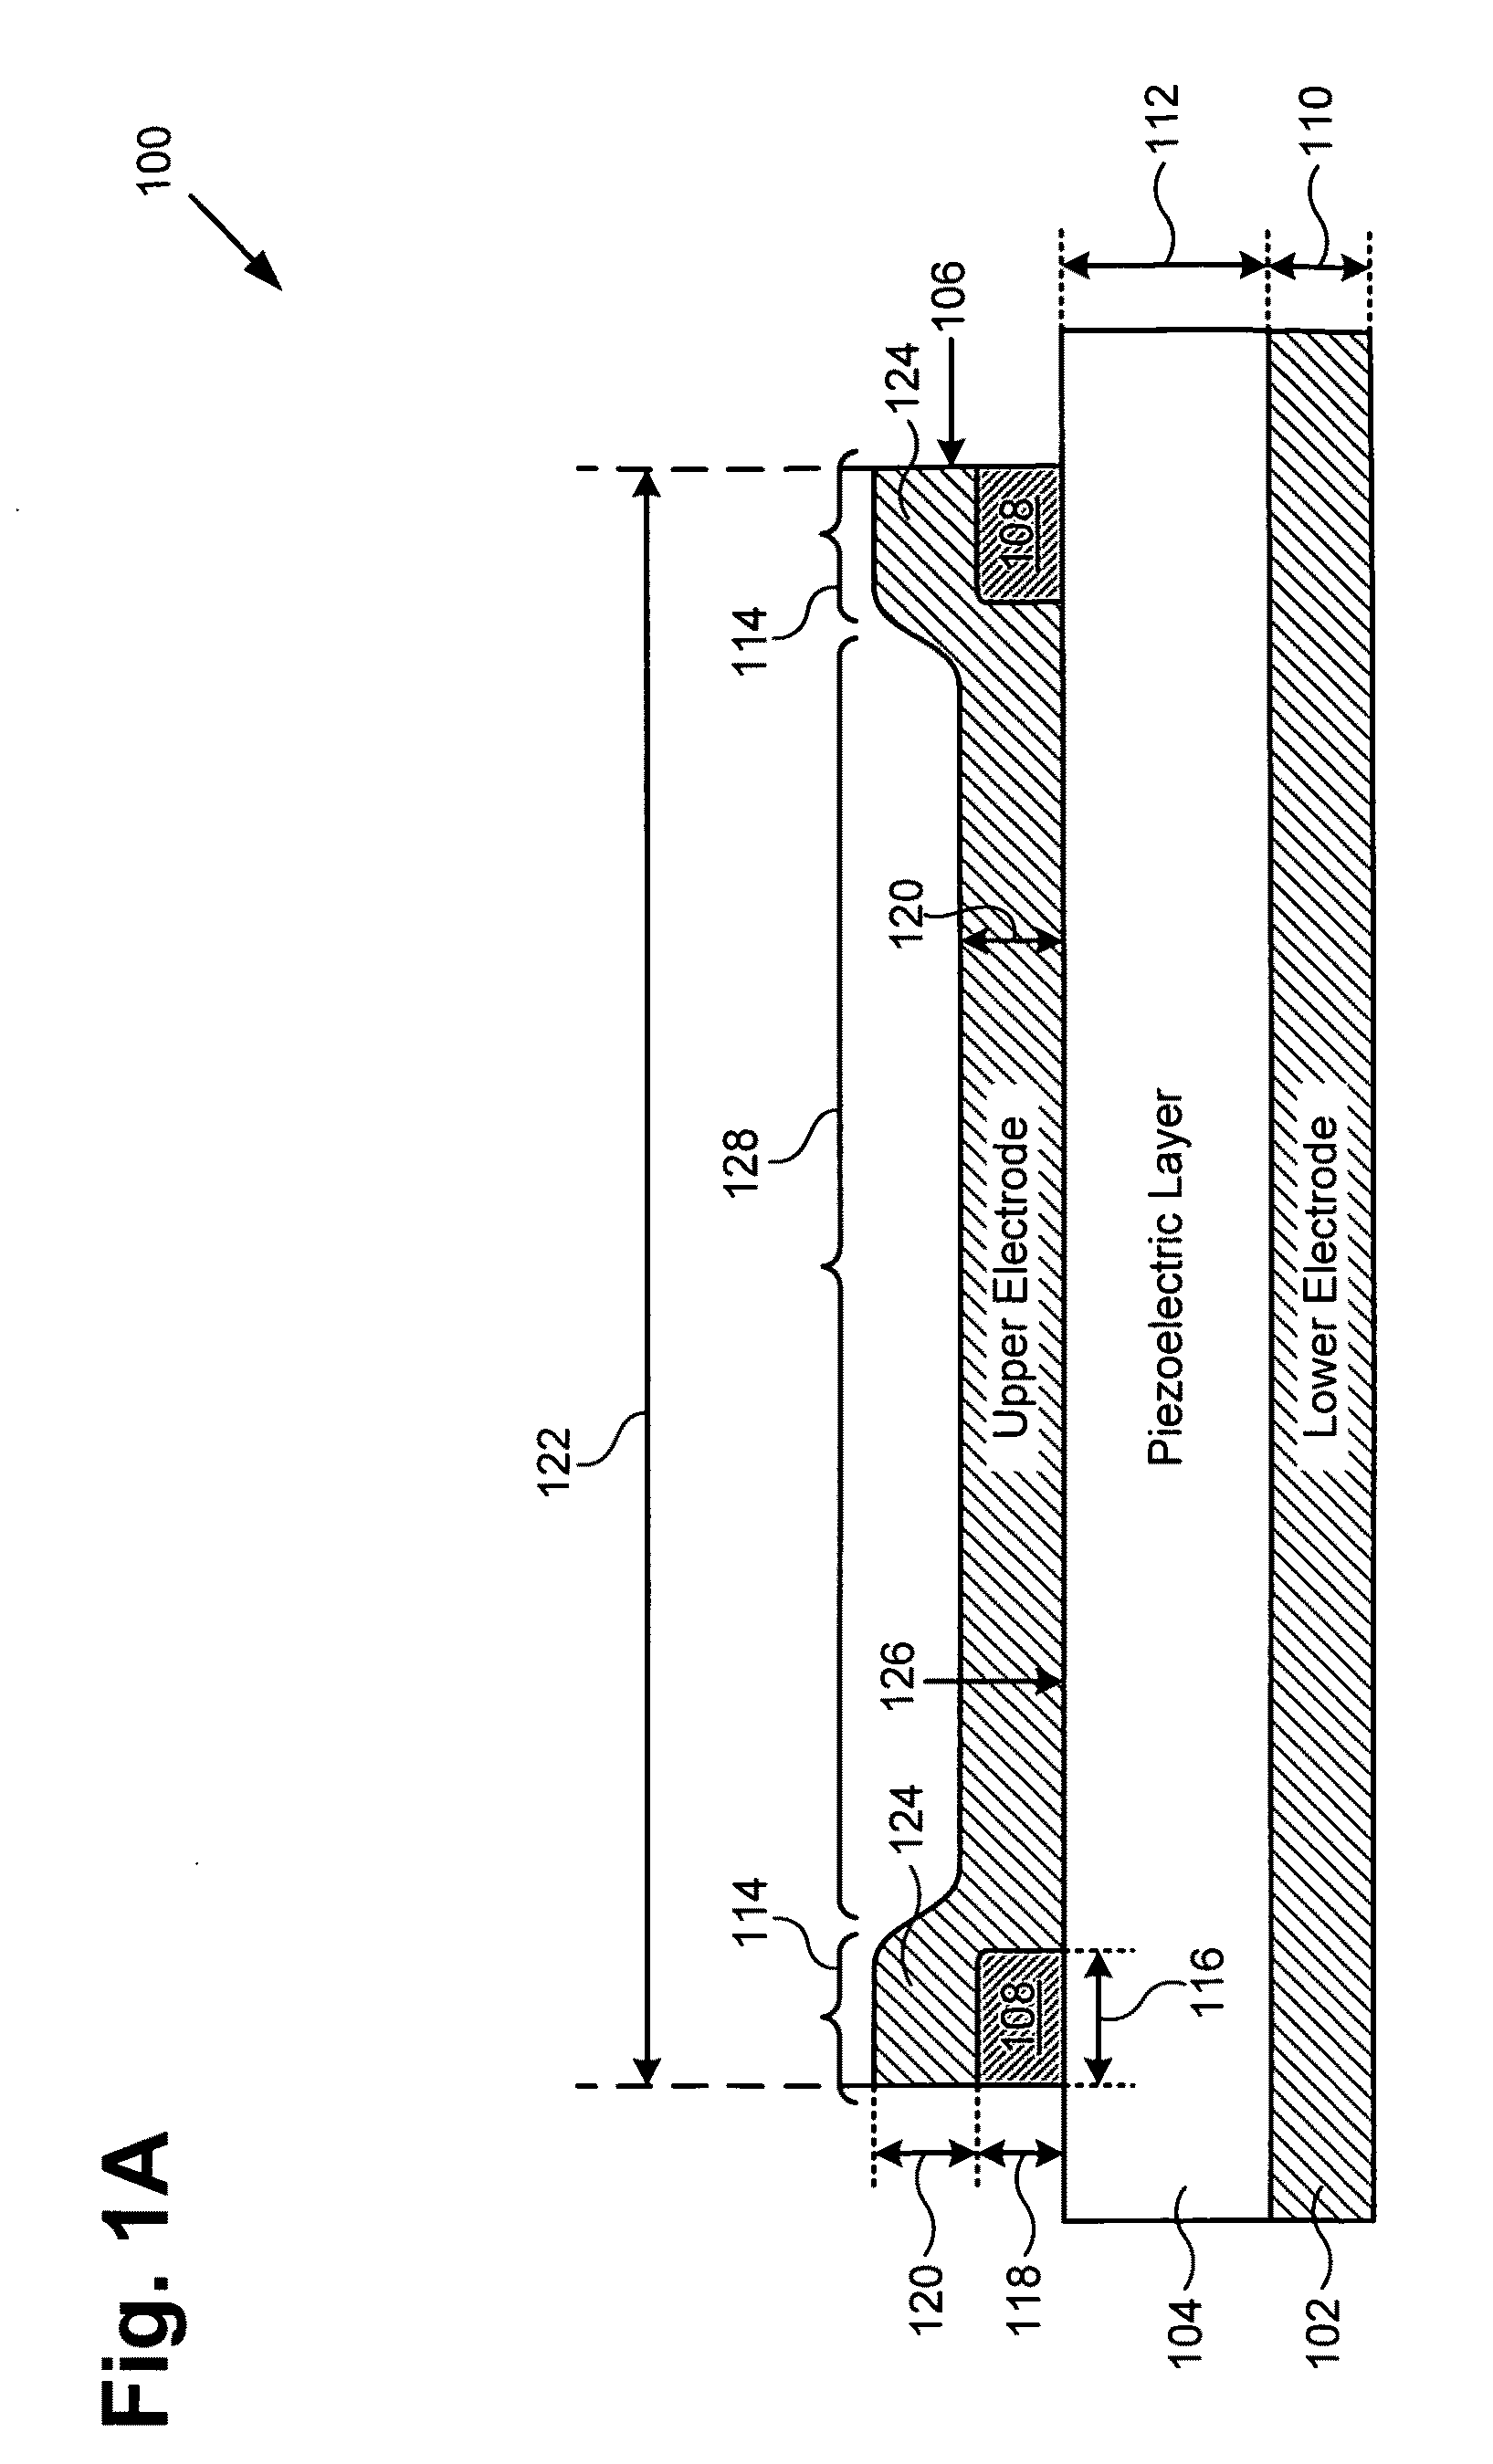 Bulk acoustic wave resonator with controlled thickness region having controlled electromechanical coupling